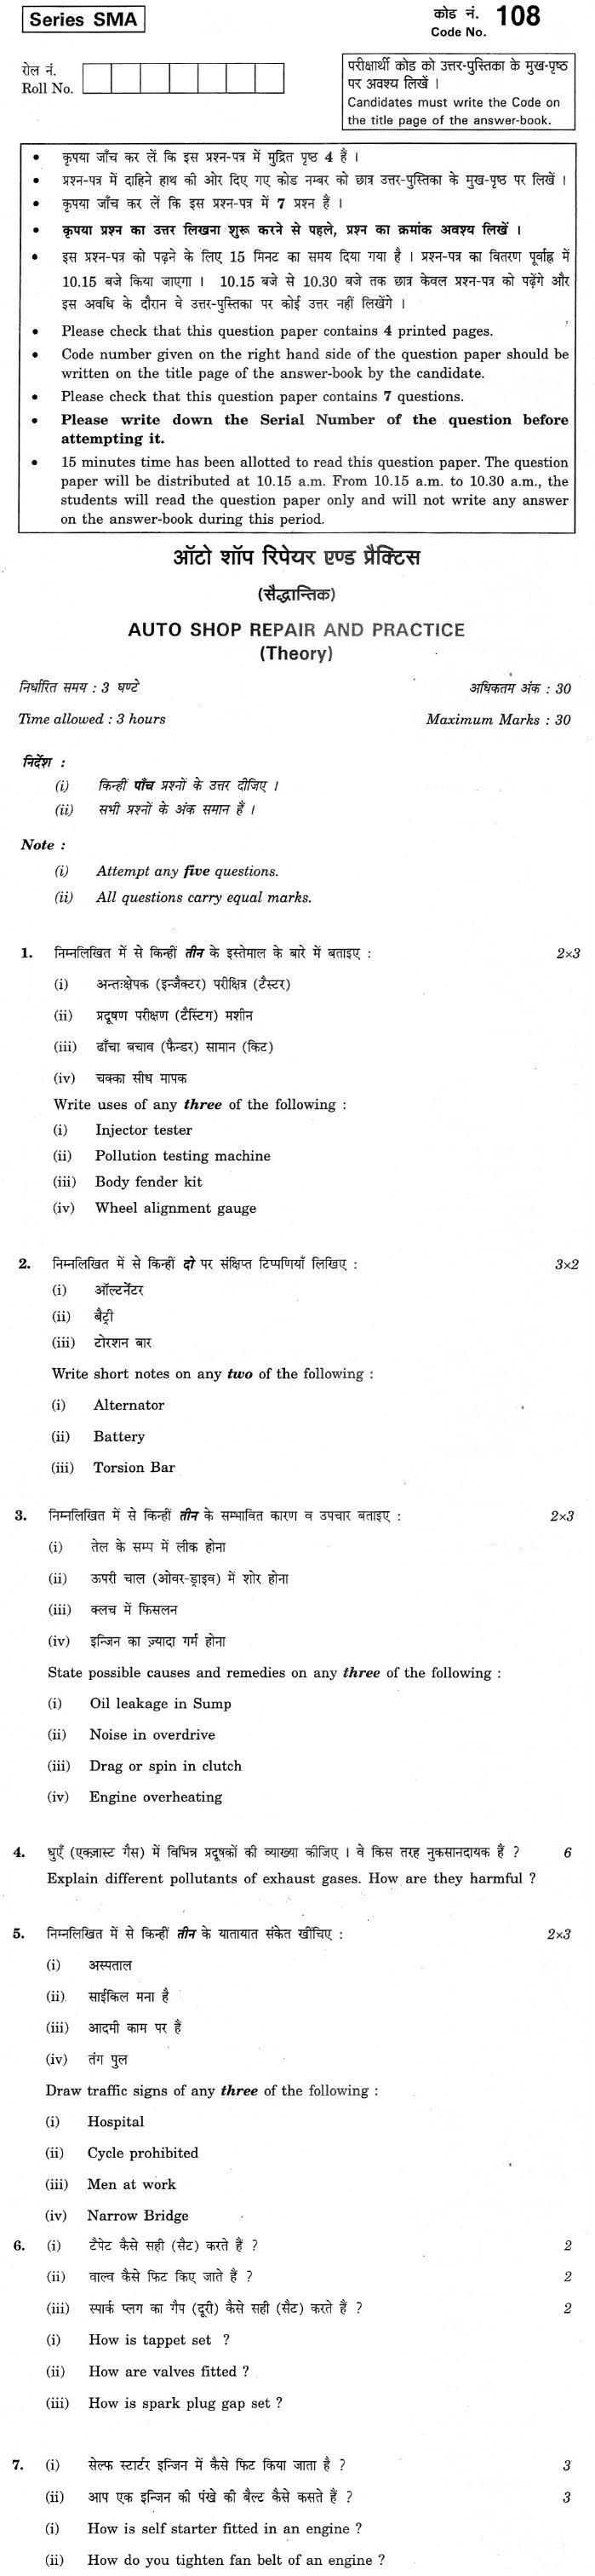 CBSE Class XII Previous Year Question Paper 2012 Auto Shop Repair and Practice